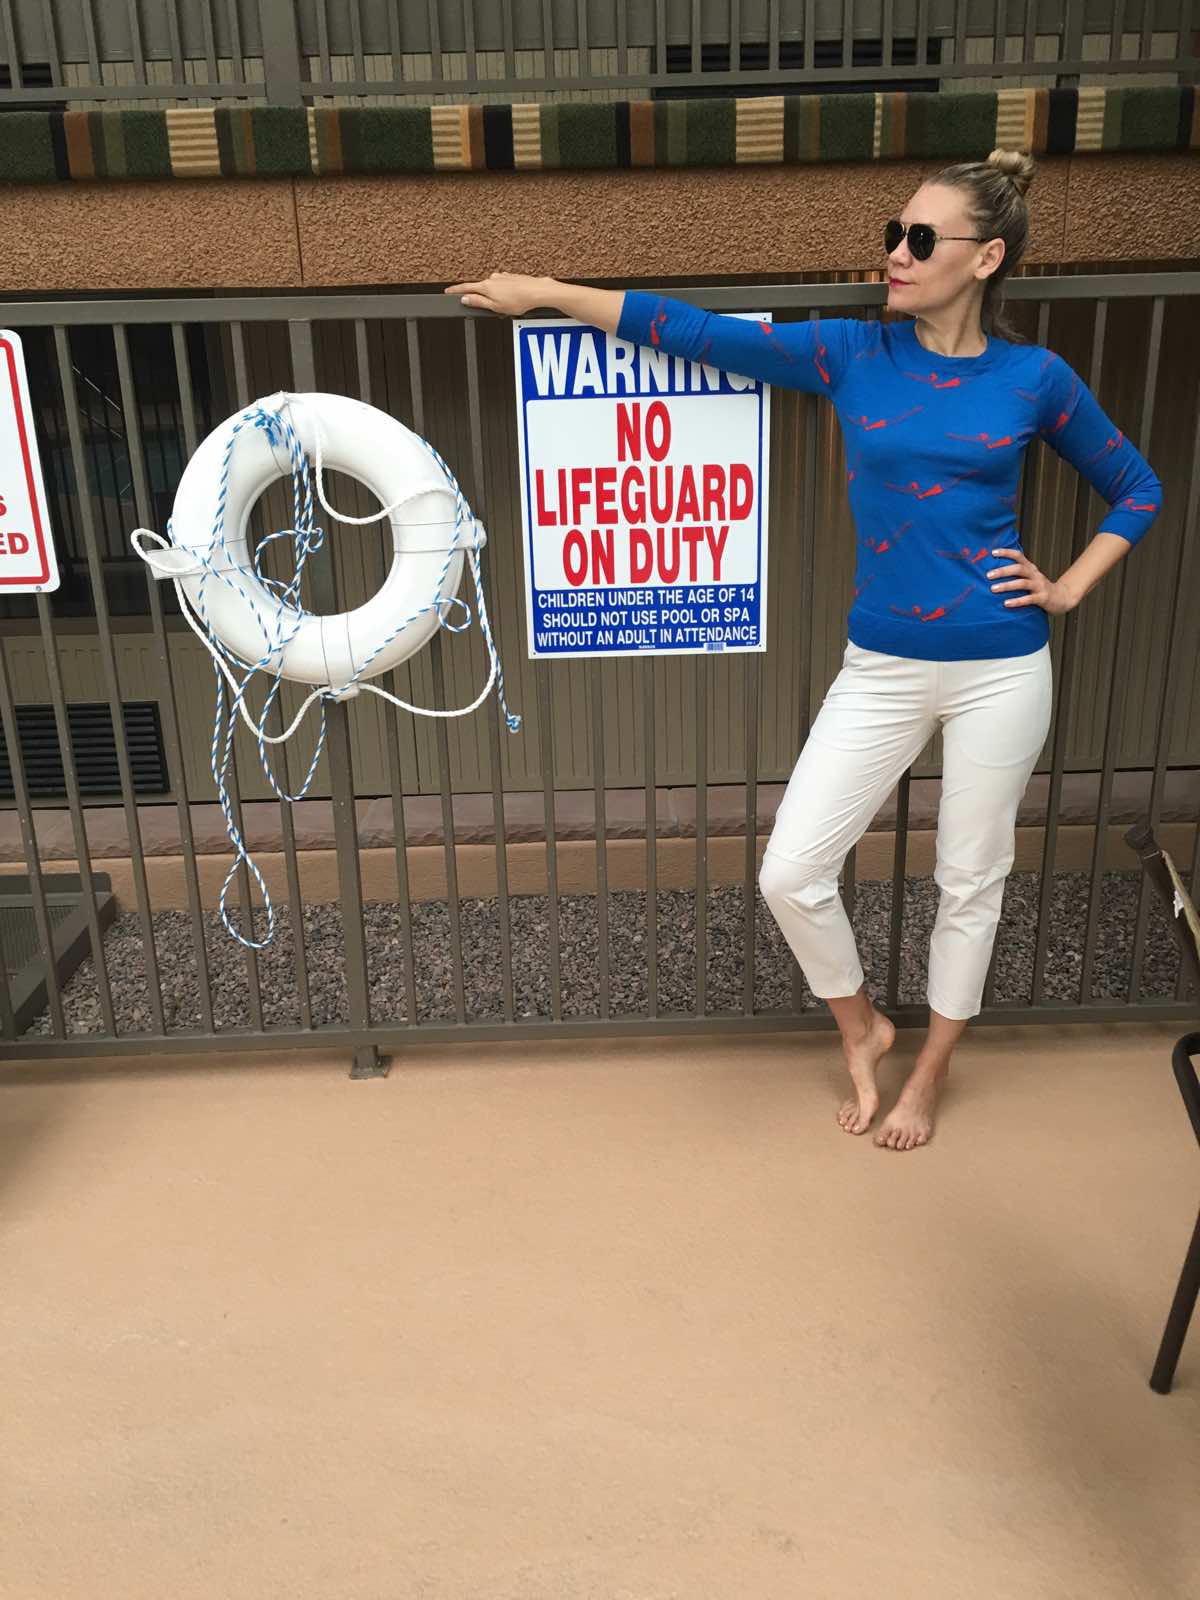 A woman in white pants and a blue sweater stands in front of a lifeguard sign